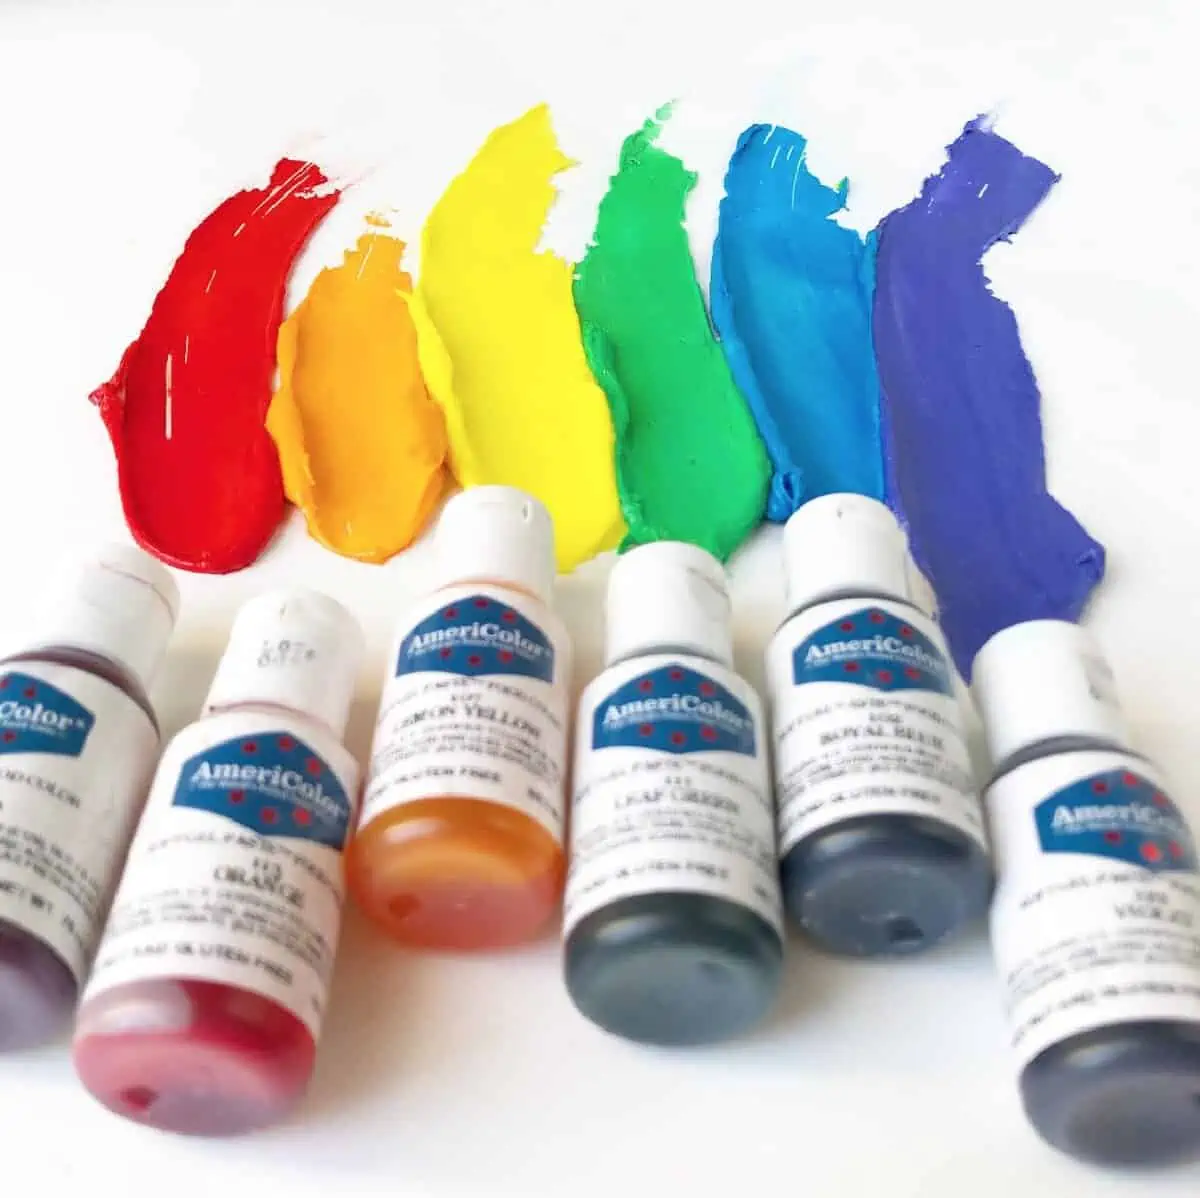 Six plastic bottles of Americolor food coloring paste laying on a white background with samples of rainbow colors streaking above.